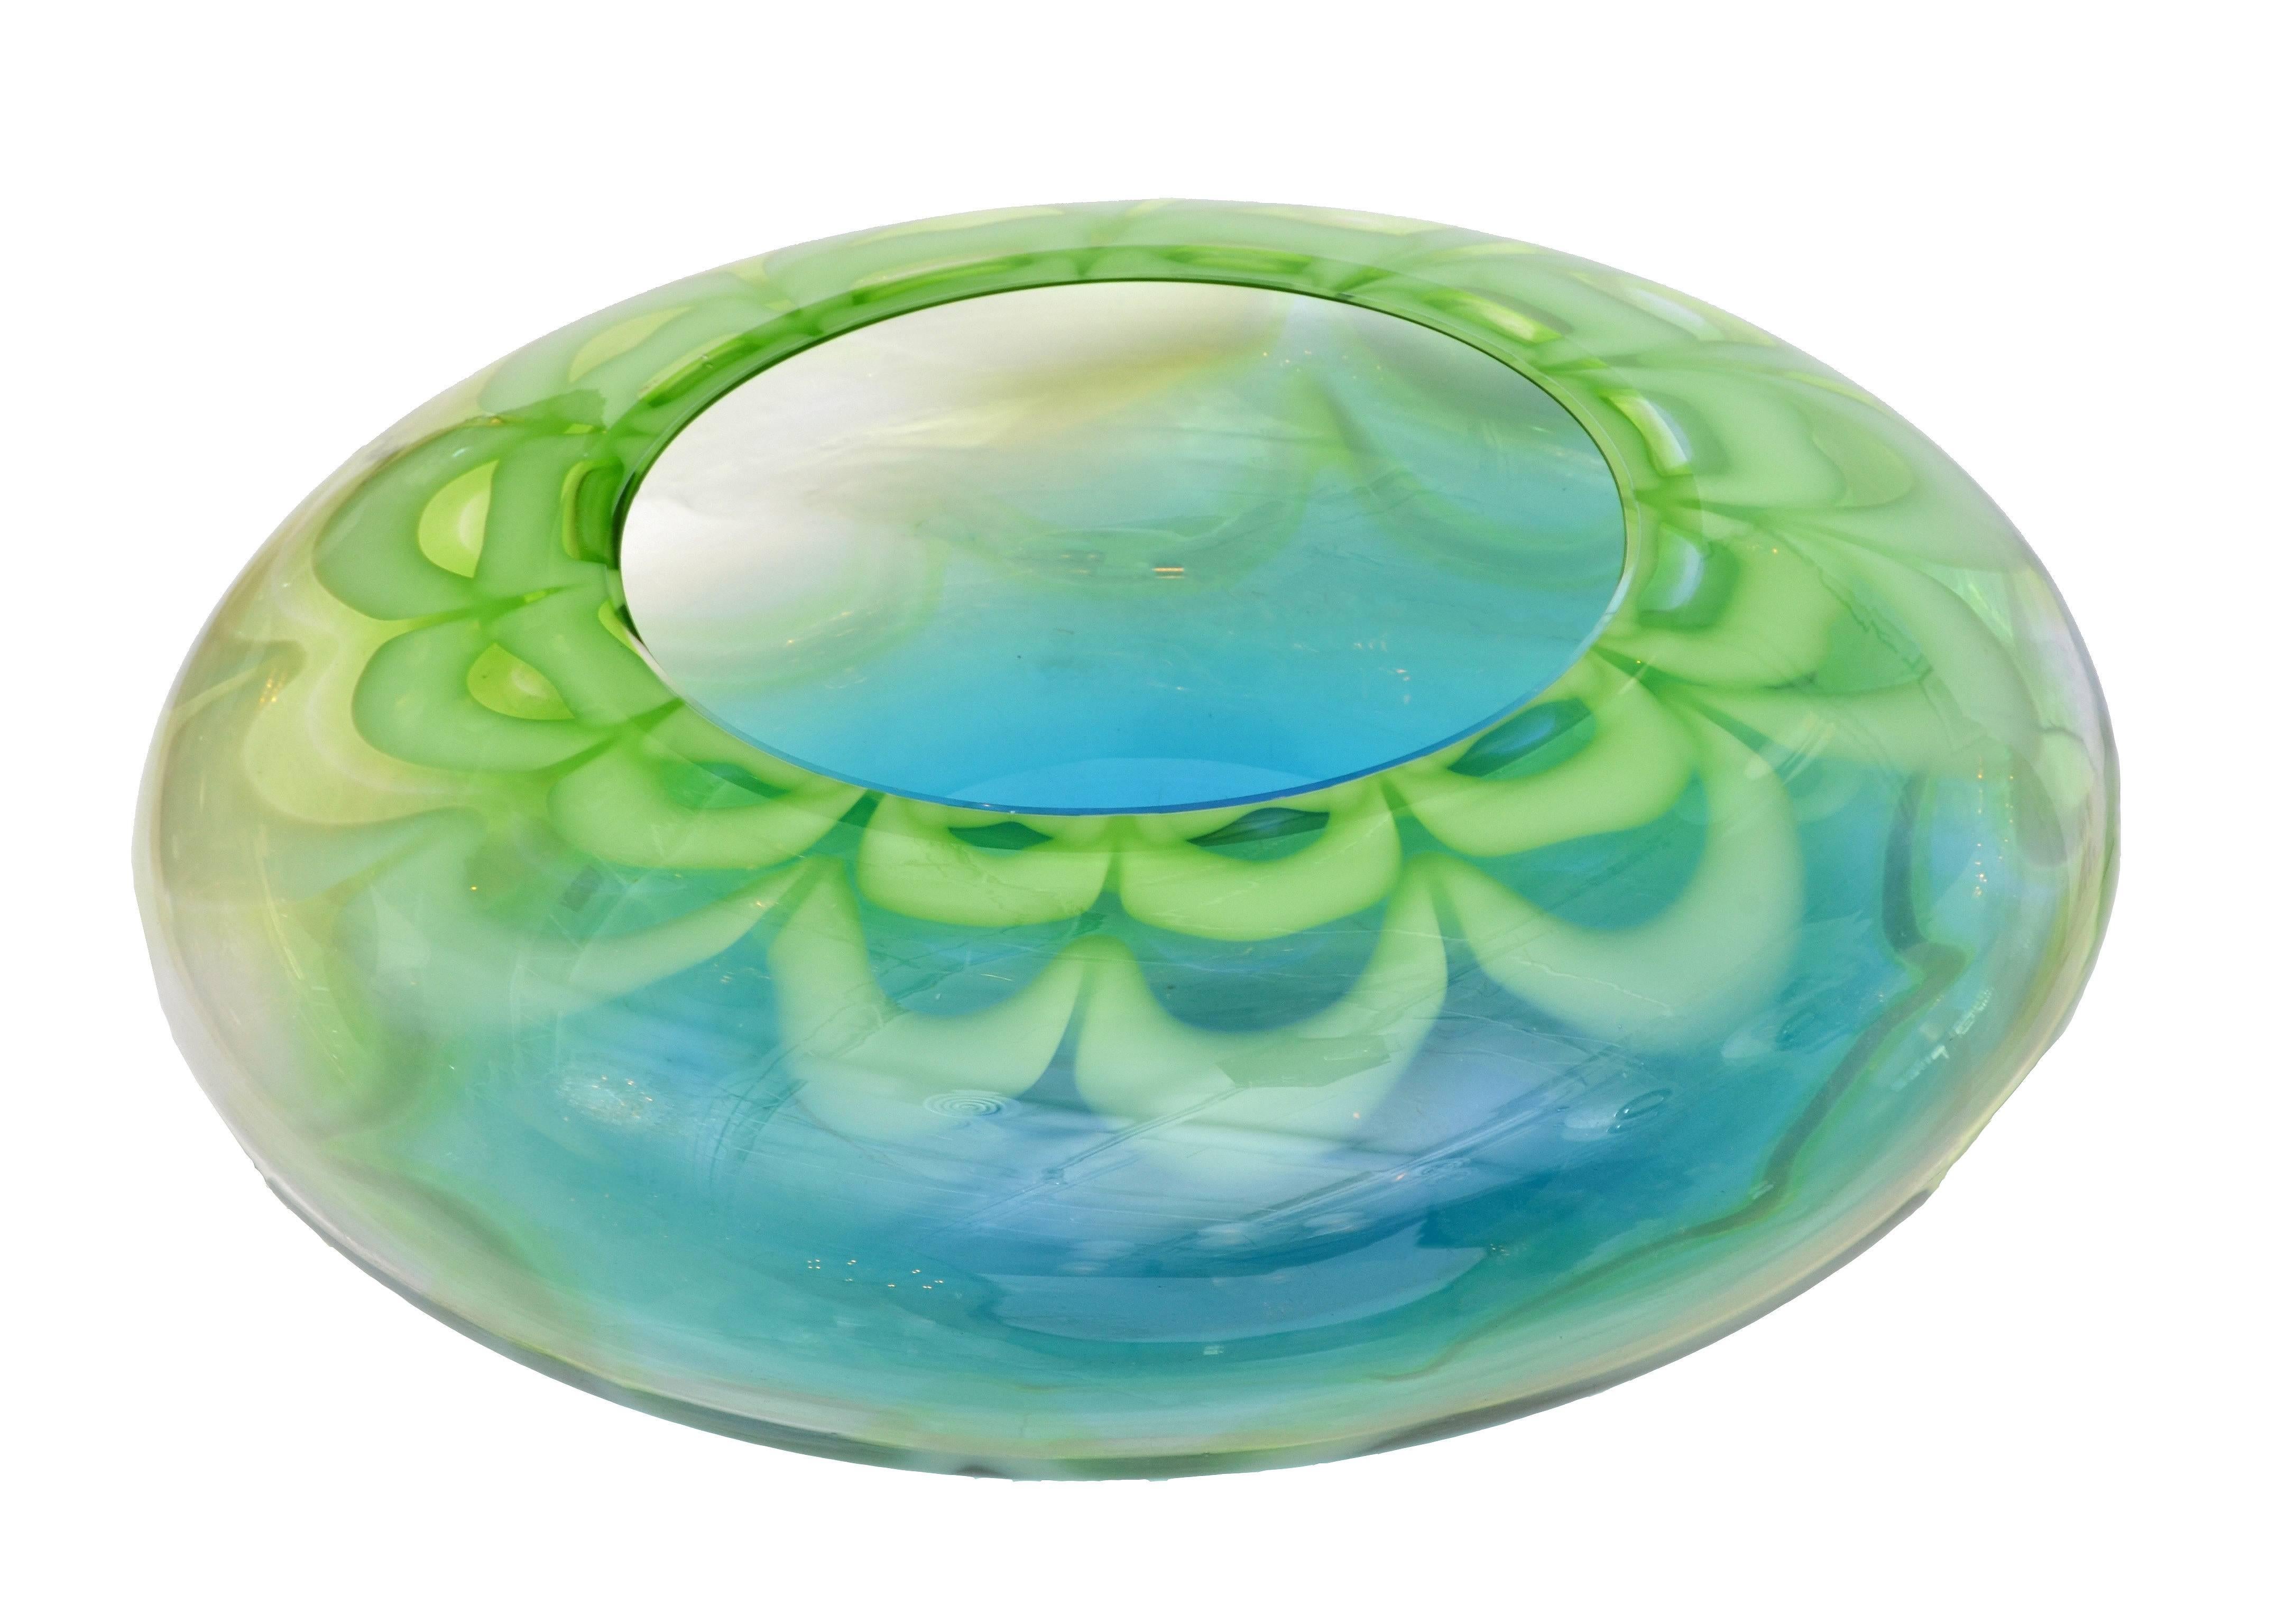 Beautiful art glass bowl or table vase in myriads of blue, white and green shades by Waterford Crystal.
Marked Evolution by Waterford.